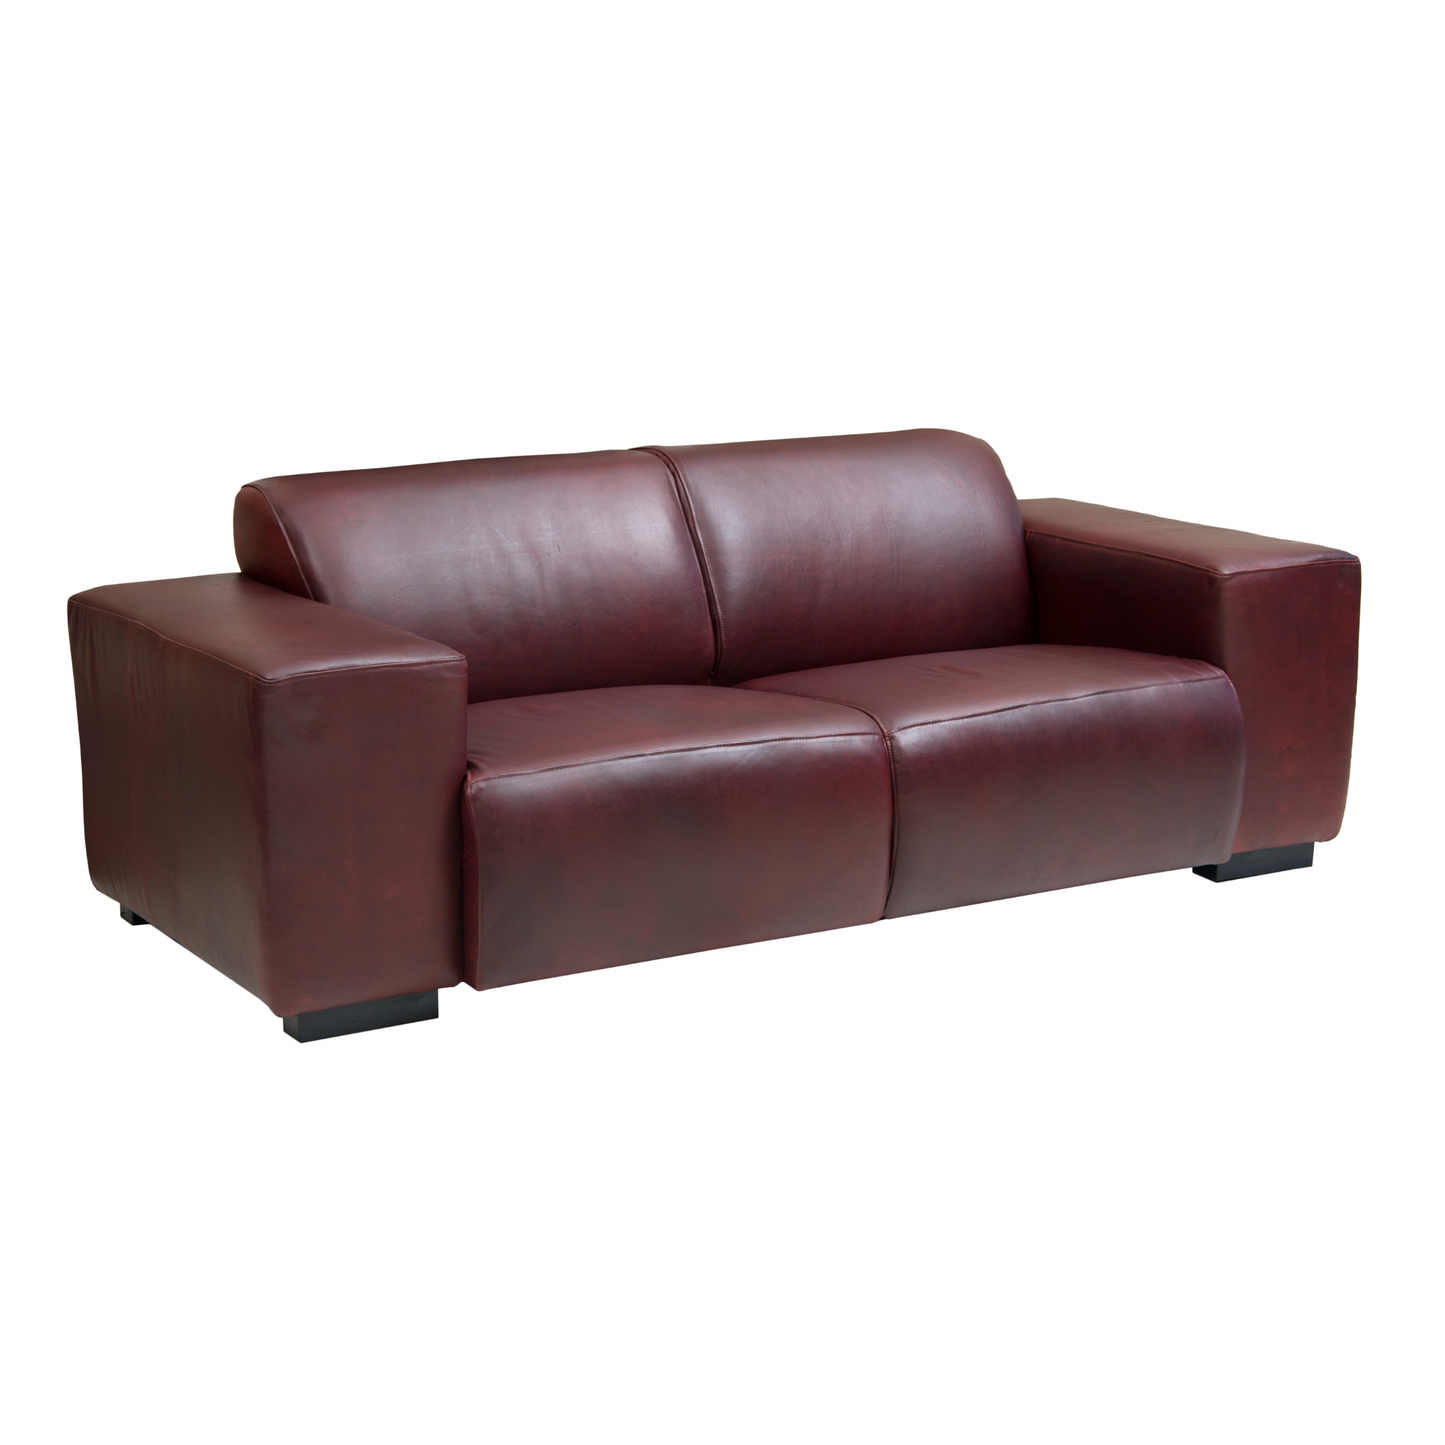 Contemporary Brooklyn Sofa – Embrace the raw, contemporary charm of the Brooklyn sofa. With its bulky design, square lines, and comfortable, relaxed style, it exudes a natural and authentic feel. Upholstered in genuine leather and fabric, this sofa is customizable to your specifications, adding a touch of rugged sophistication to your space.